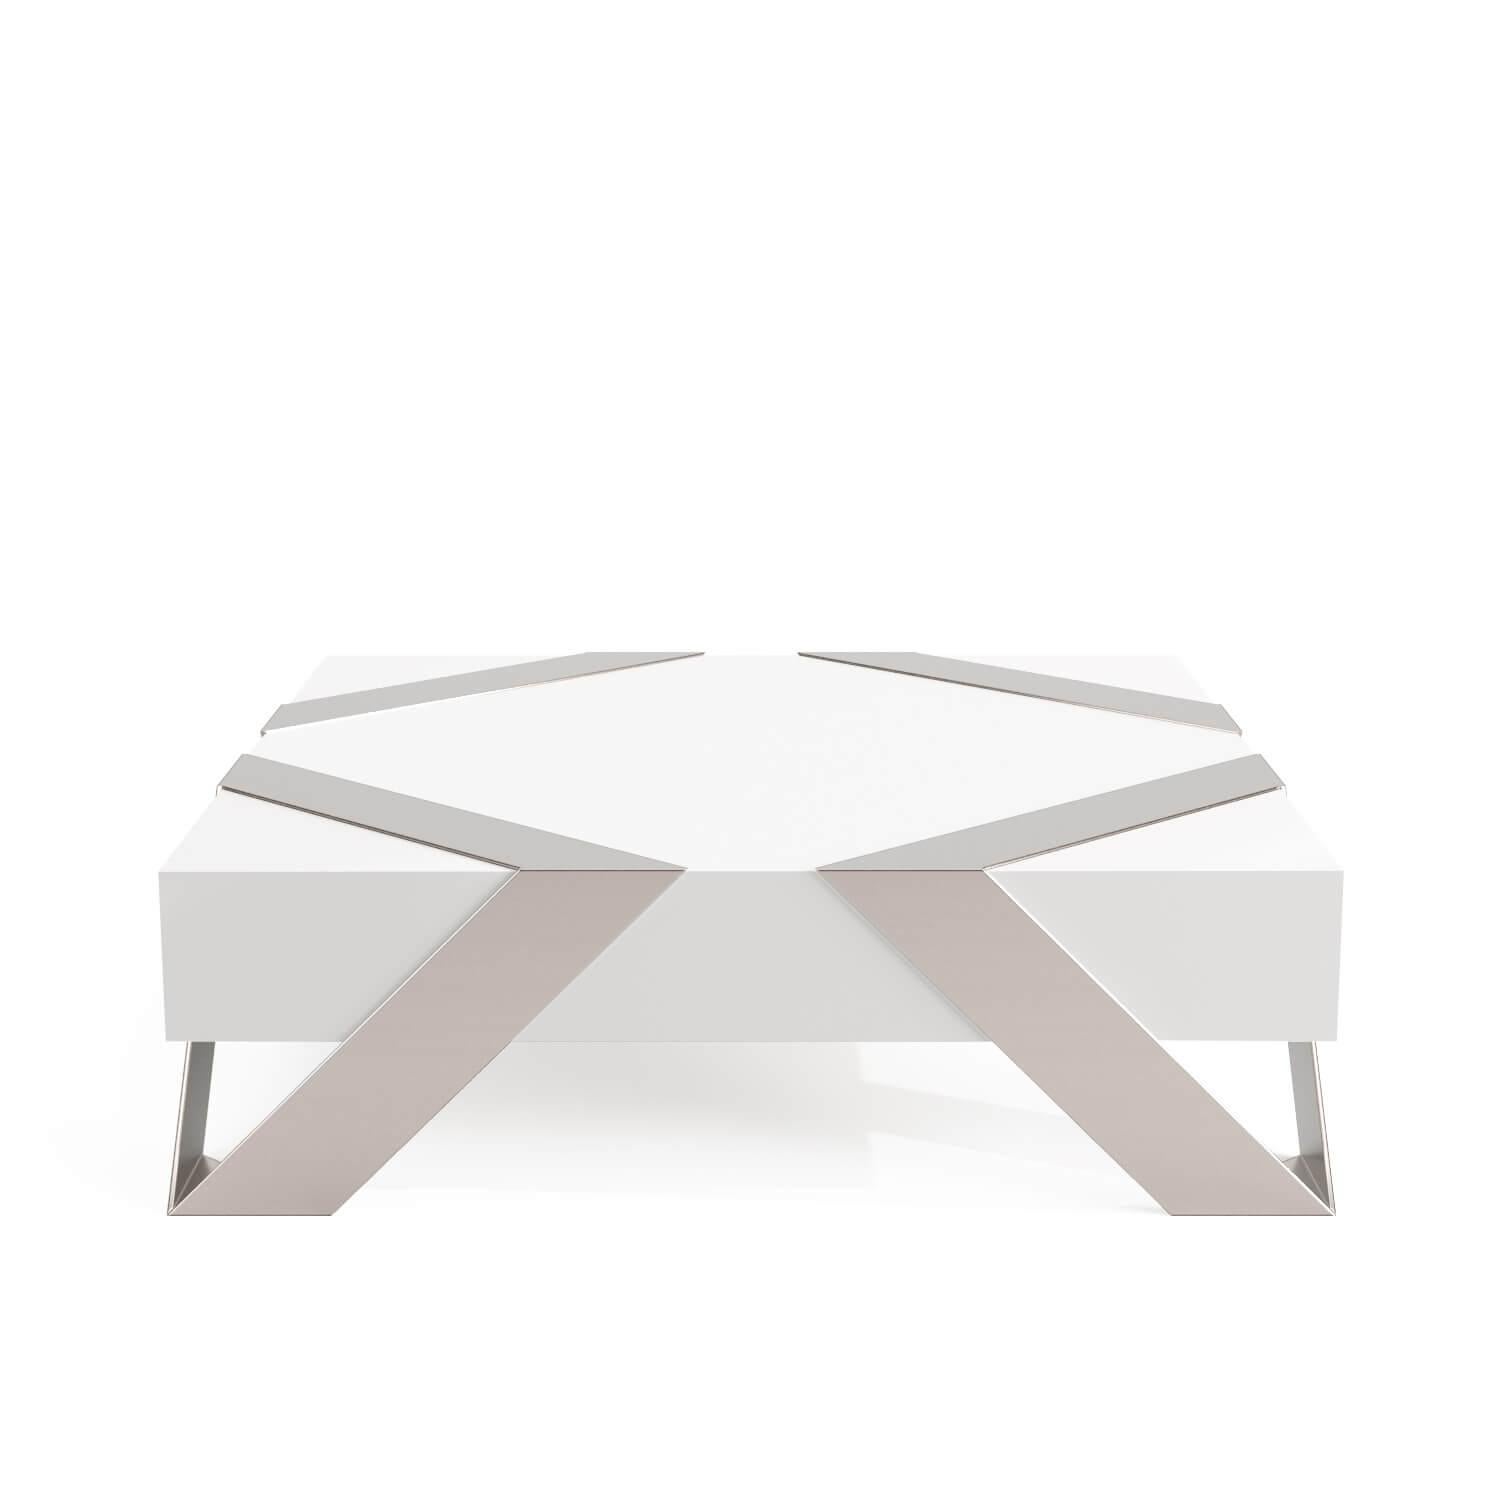 Modern Minimalist Square Center Coffee Table Walnut Wood Brushed Stainless Steel In New Condition For Sale In Vila Nova Famalicão, PT